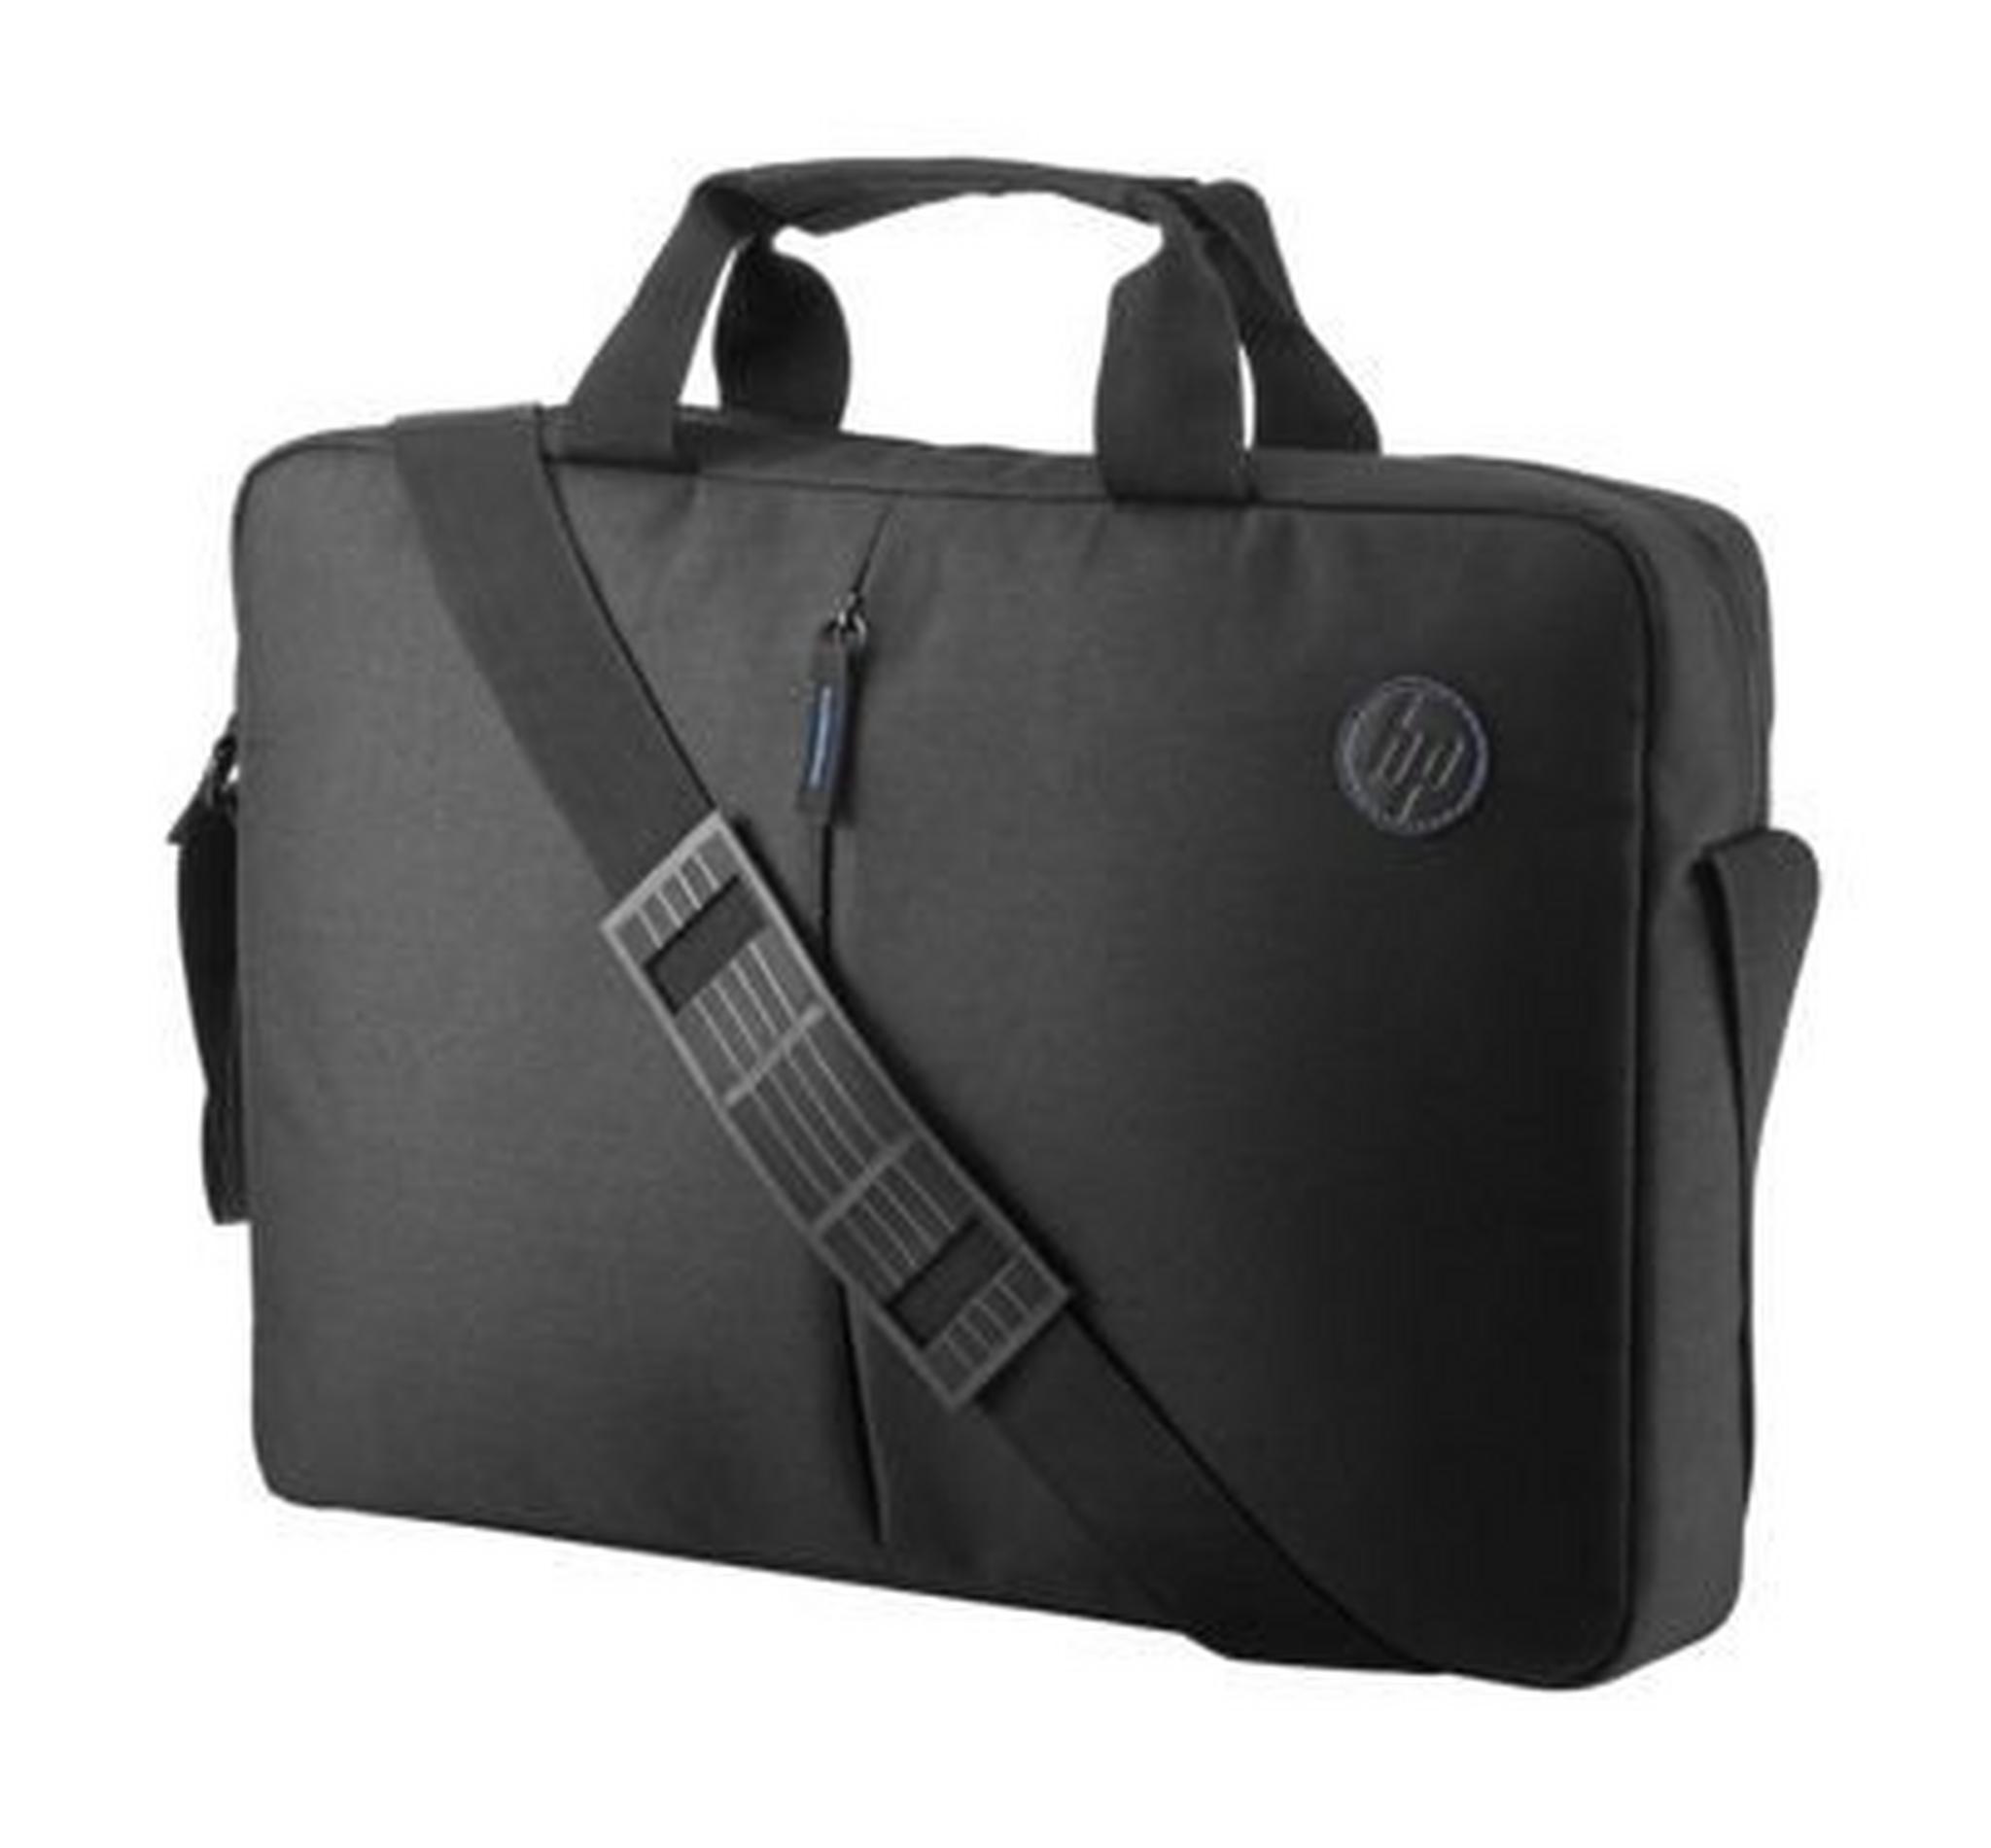 HP Focus Topload Laptop Bag Up To 15.6 Inches (T9B50AA) - Black